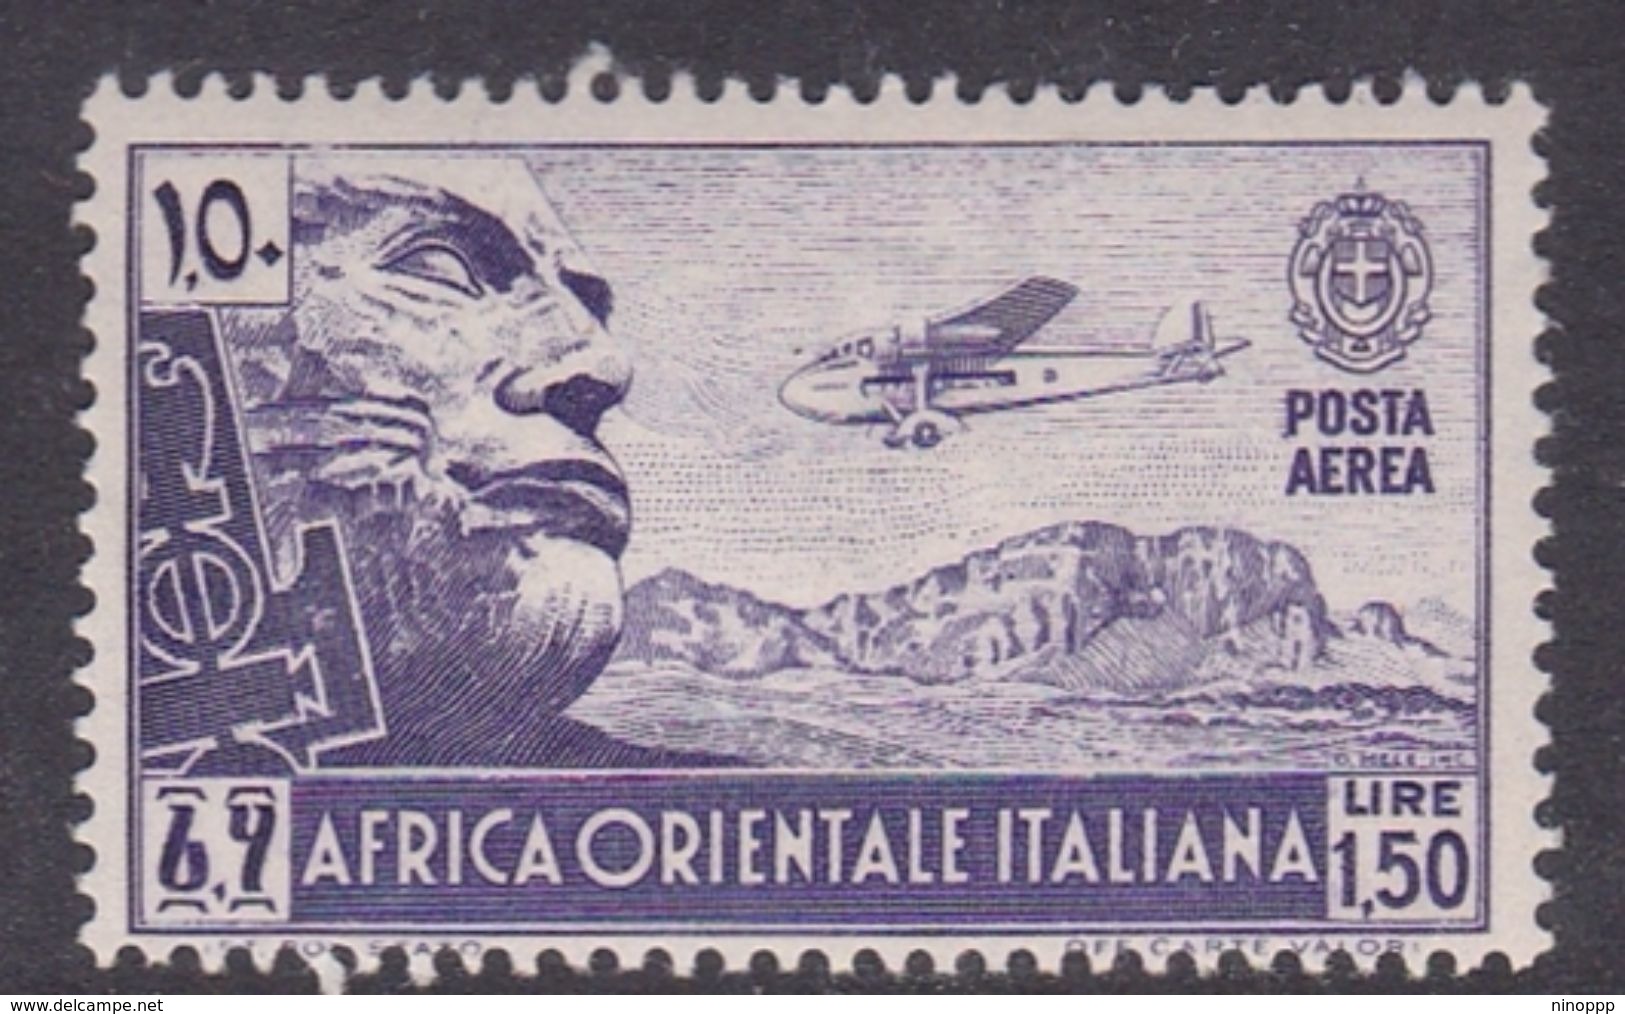 Italy-Colonies And Territories-Italian Eastern Africa AP6 1938 Air Post 1,50 Violet MH - General Issues